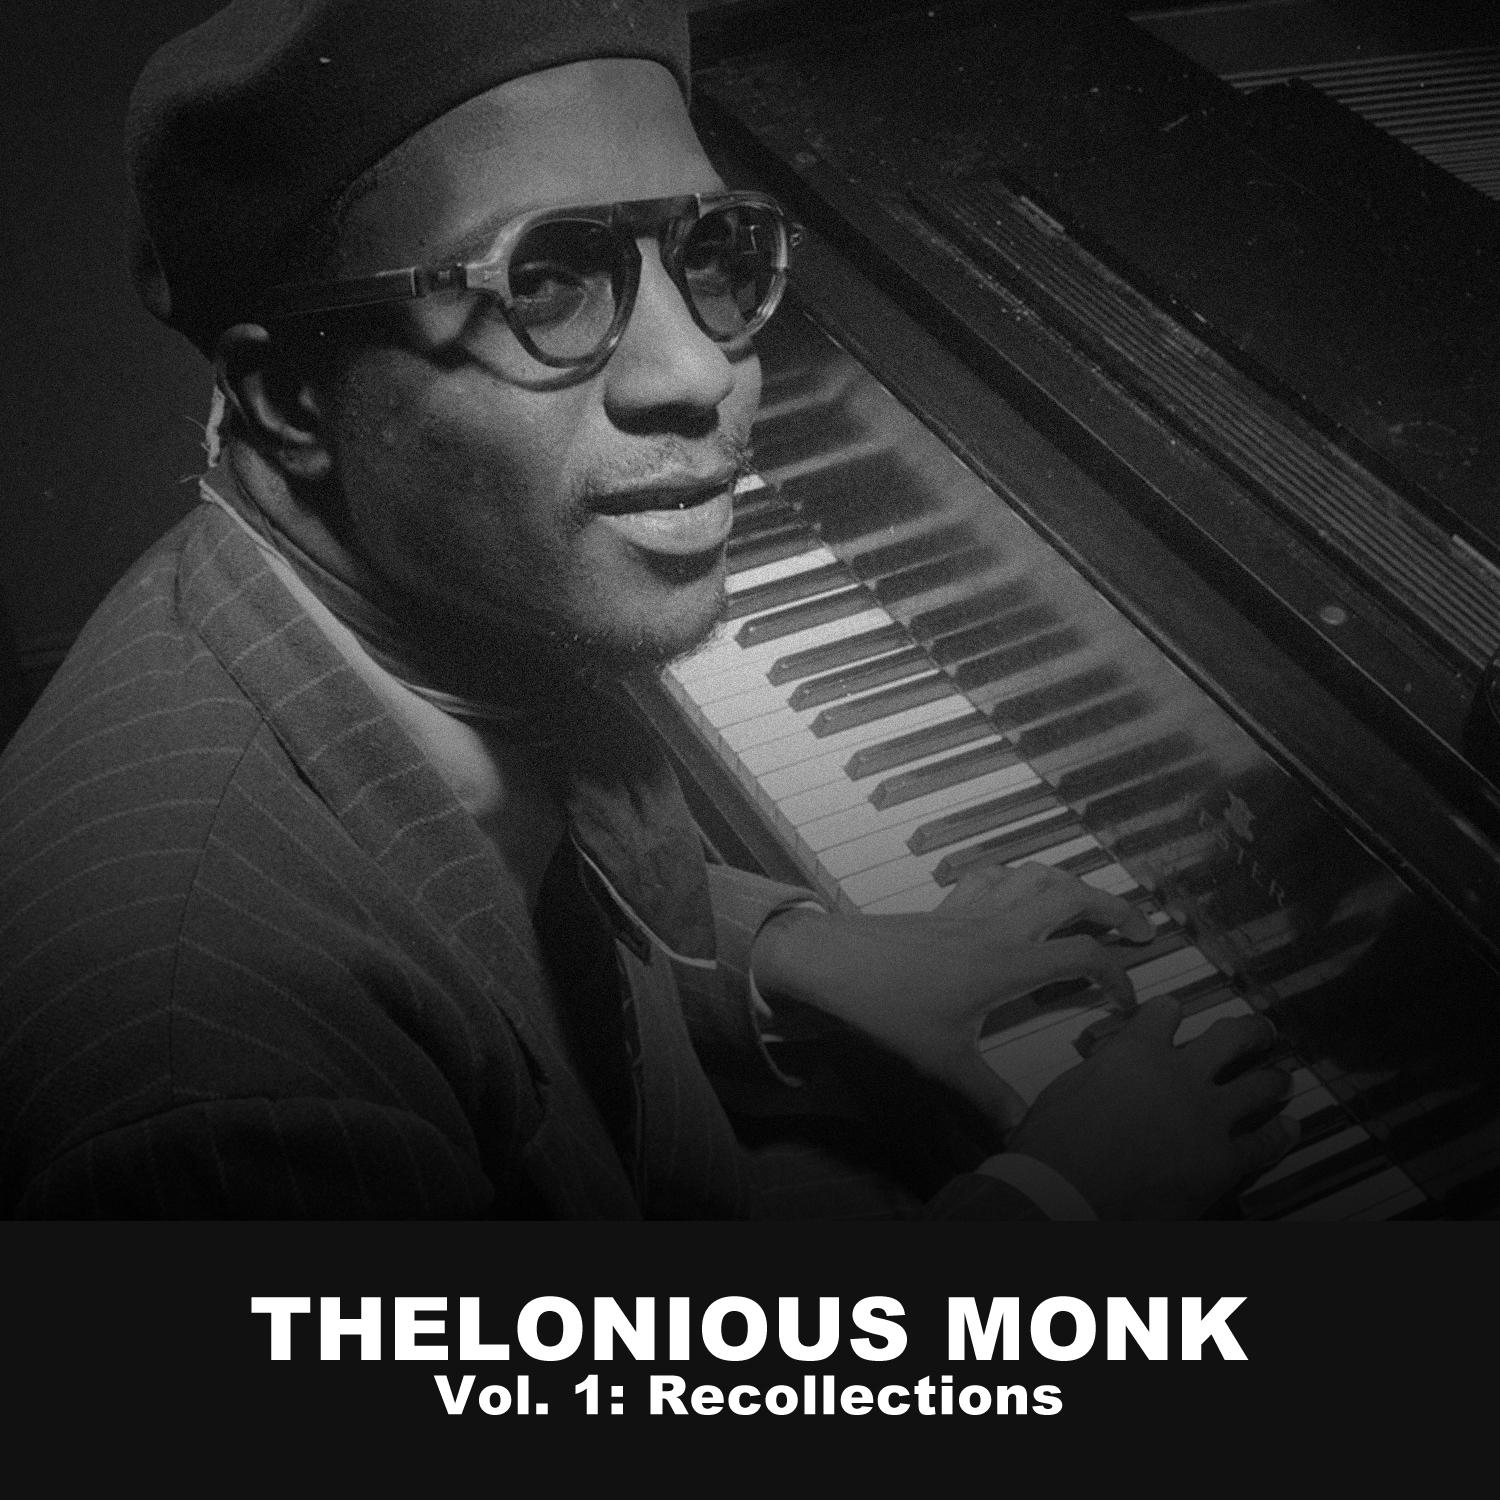 Thelonious Monk, Vol. 1: Recollections